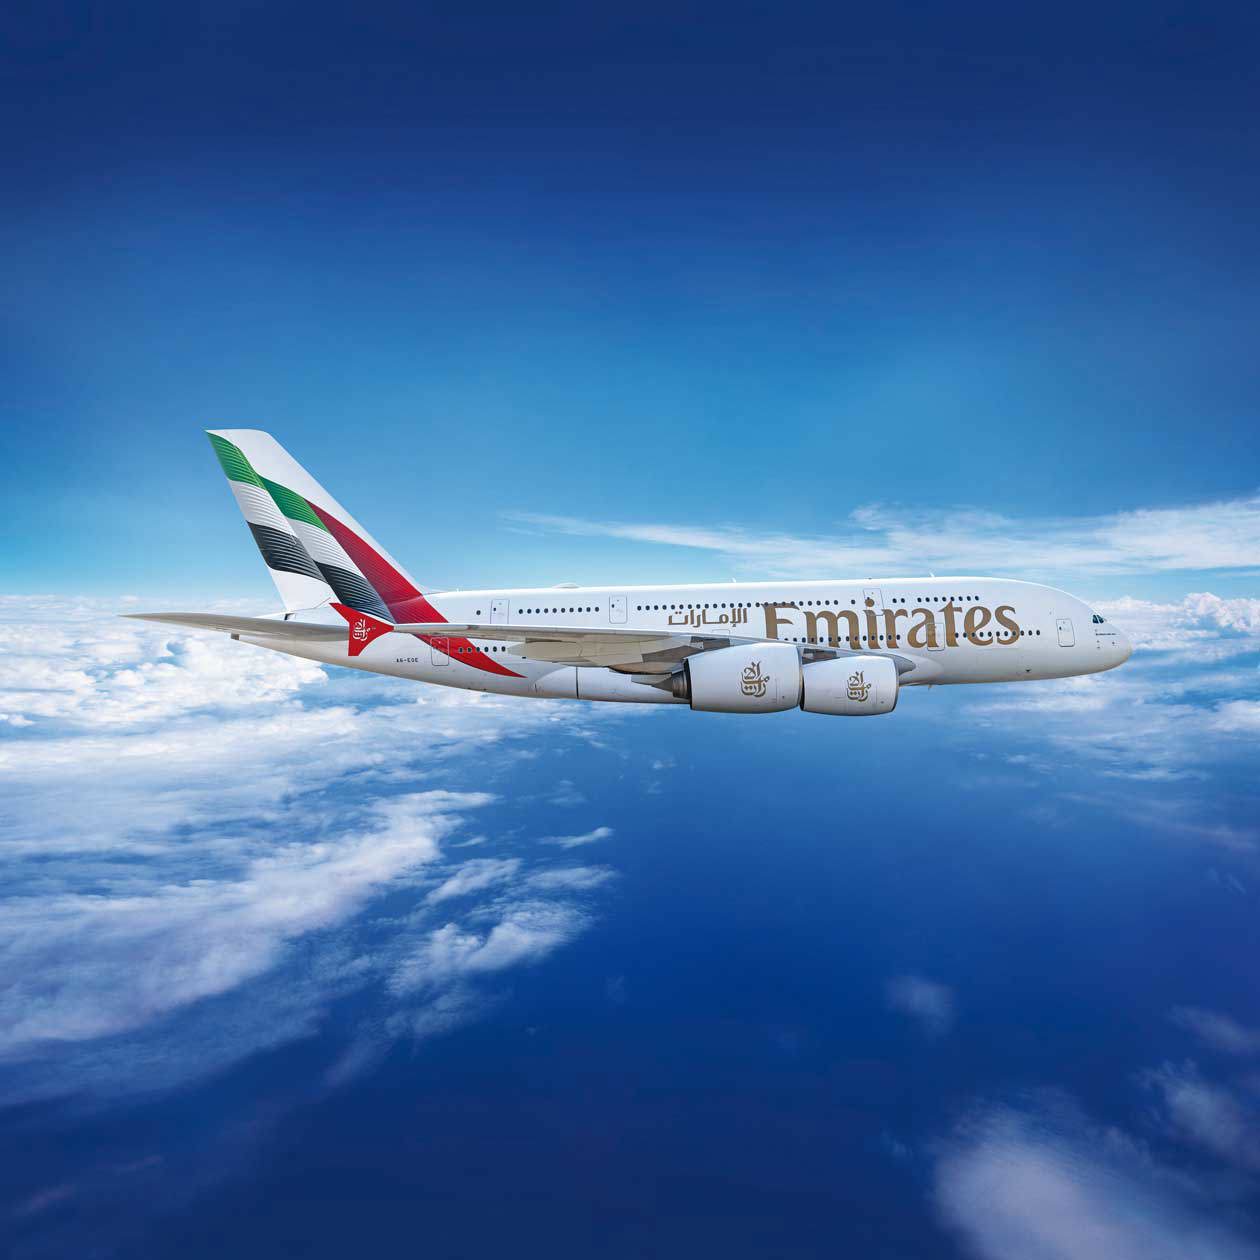  Copyright © Emirates Airlines / The Emirates Group.